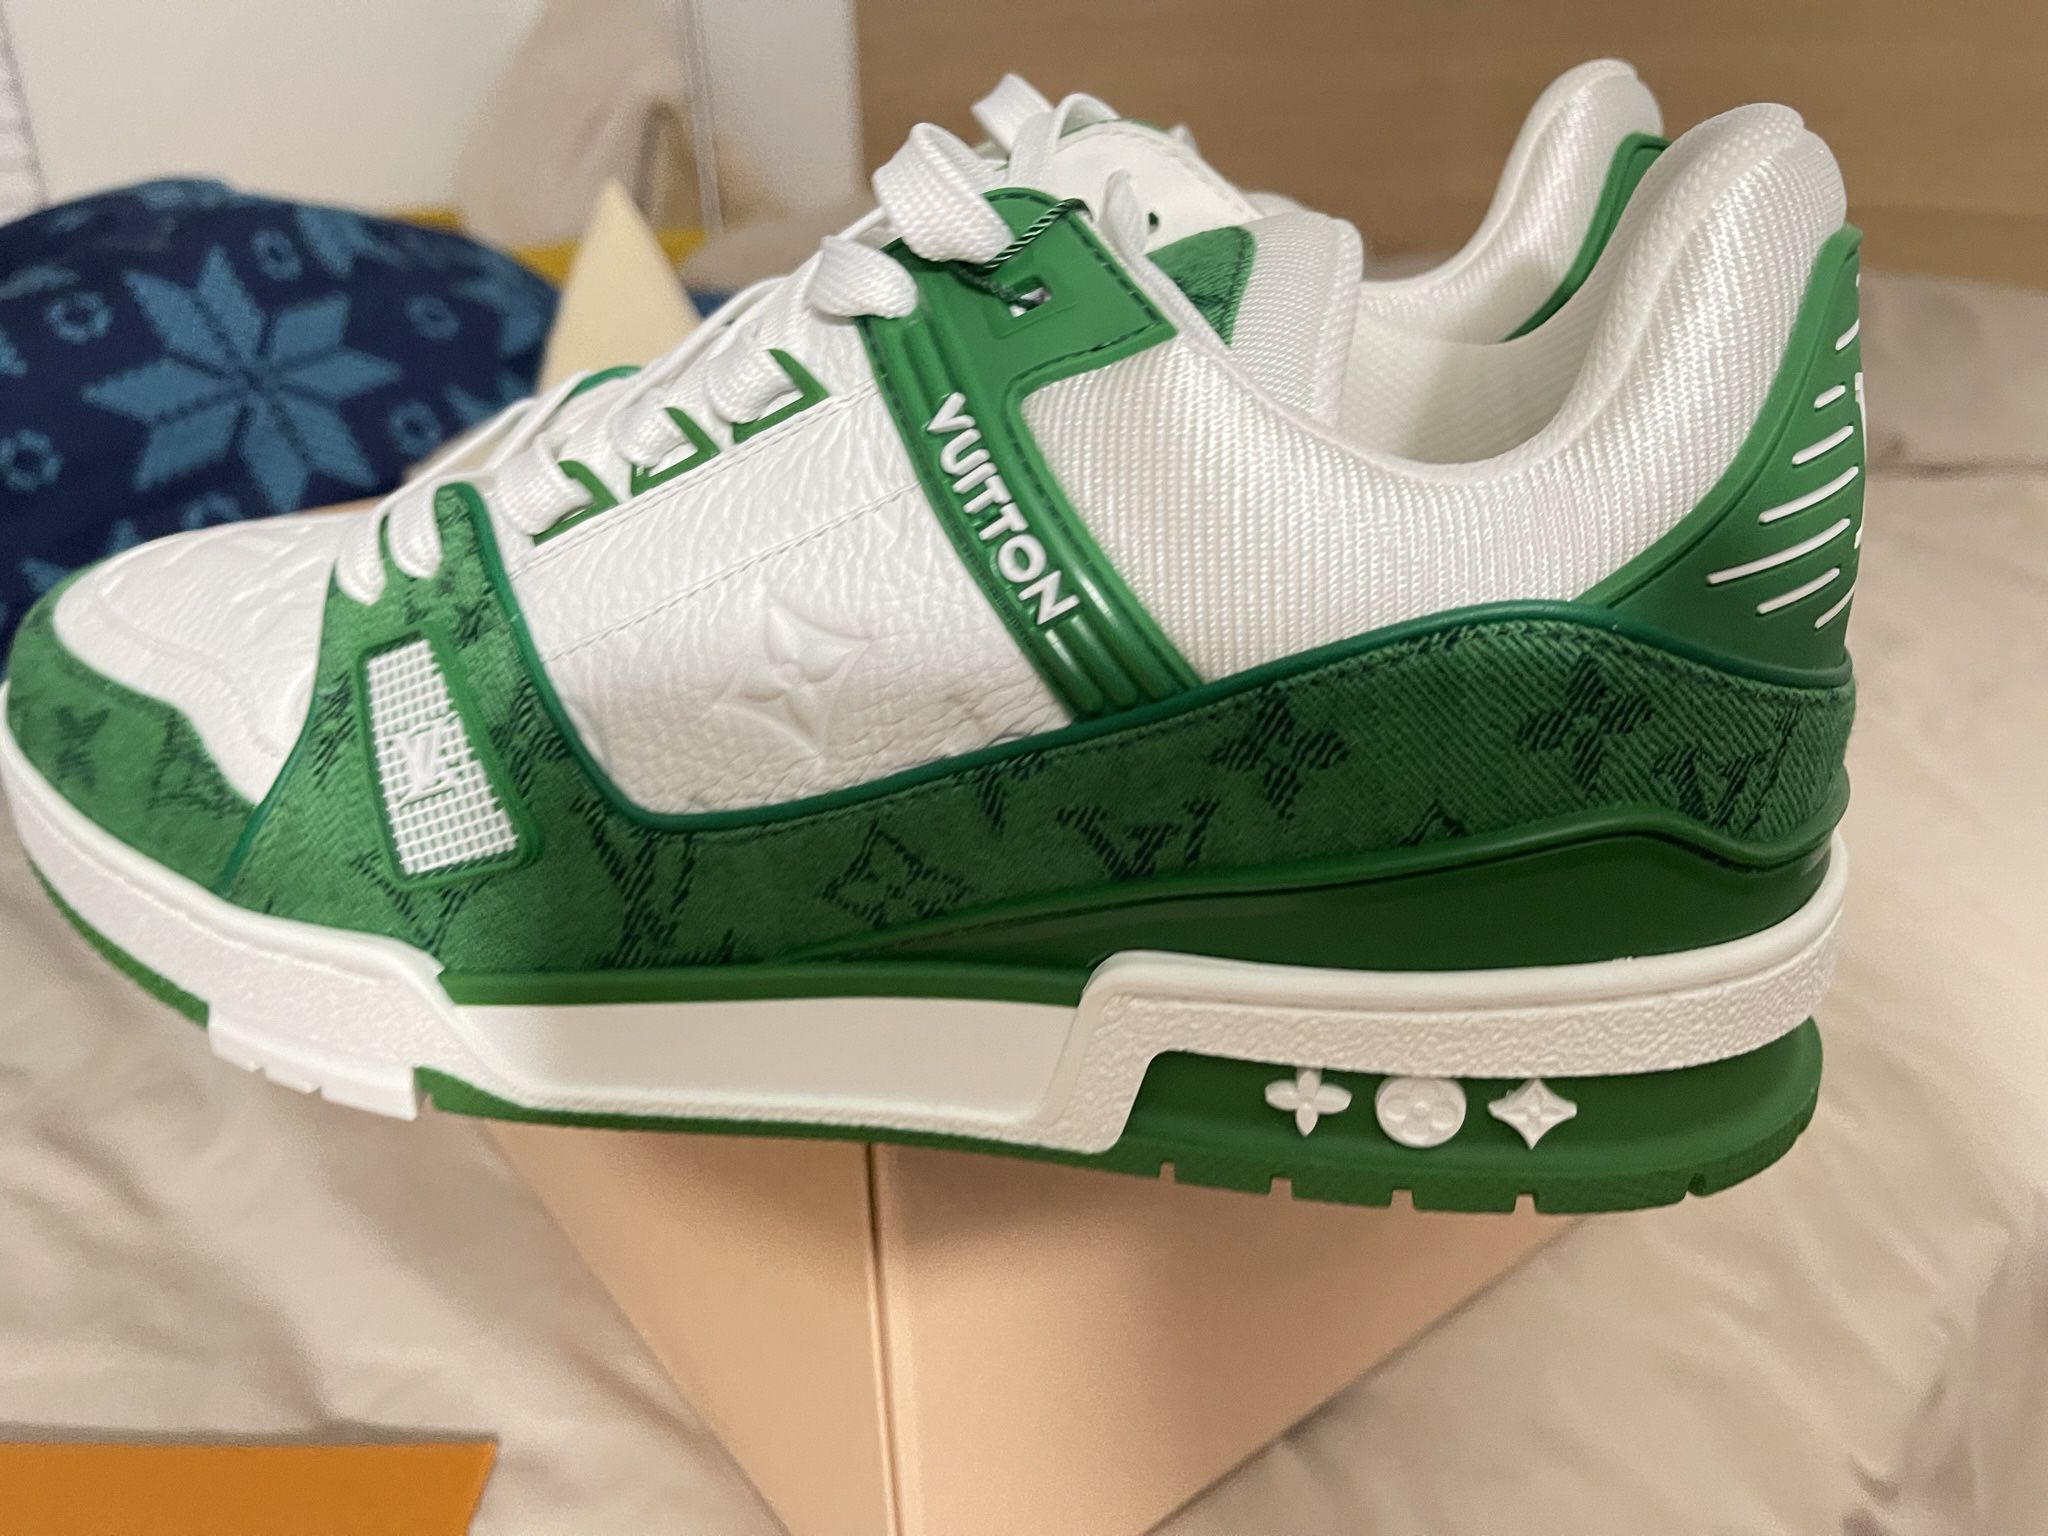 Louis Vuitton LV Trainer Green Size:lv8 us9 for Sale in Weehawken